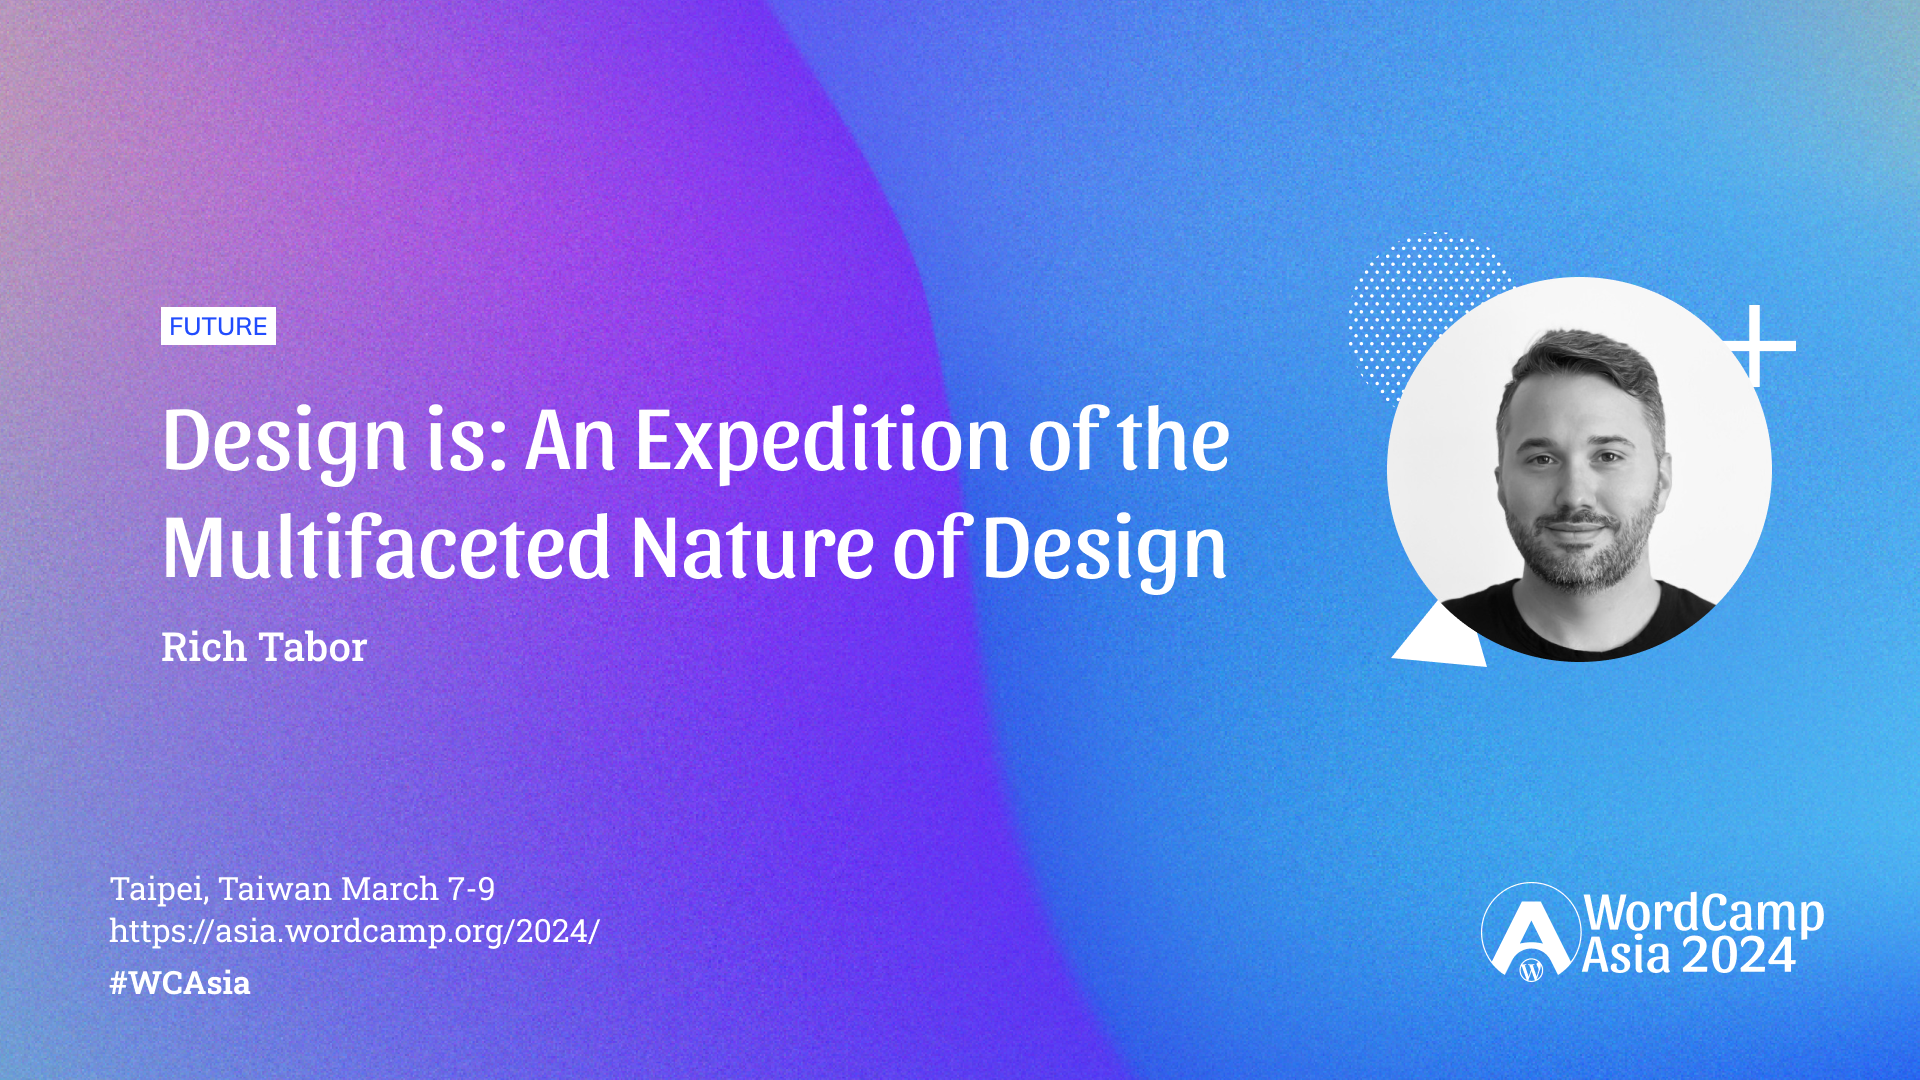 Design is: An Expedition of the Multifaceted Nature of Design